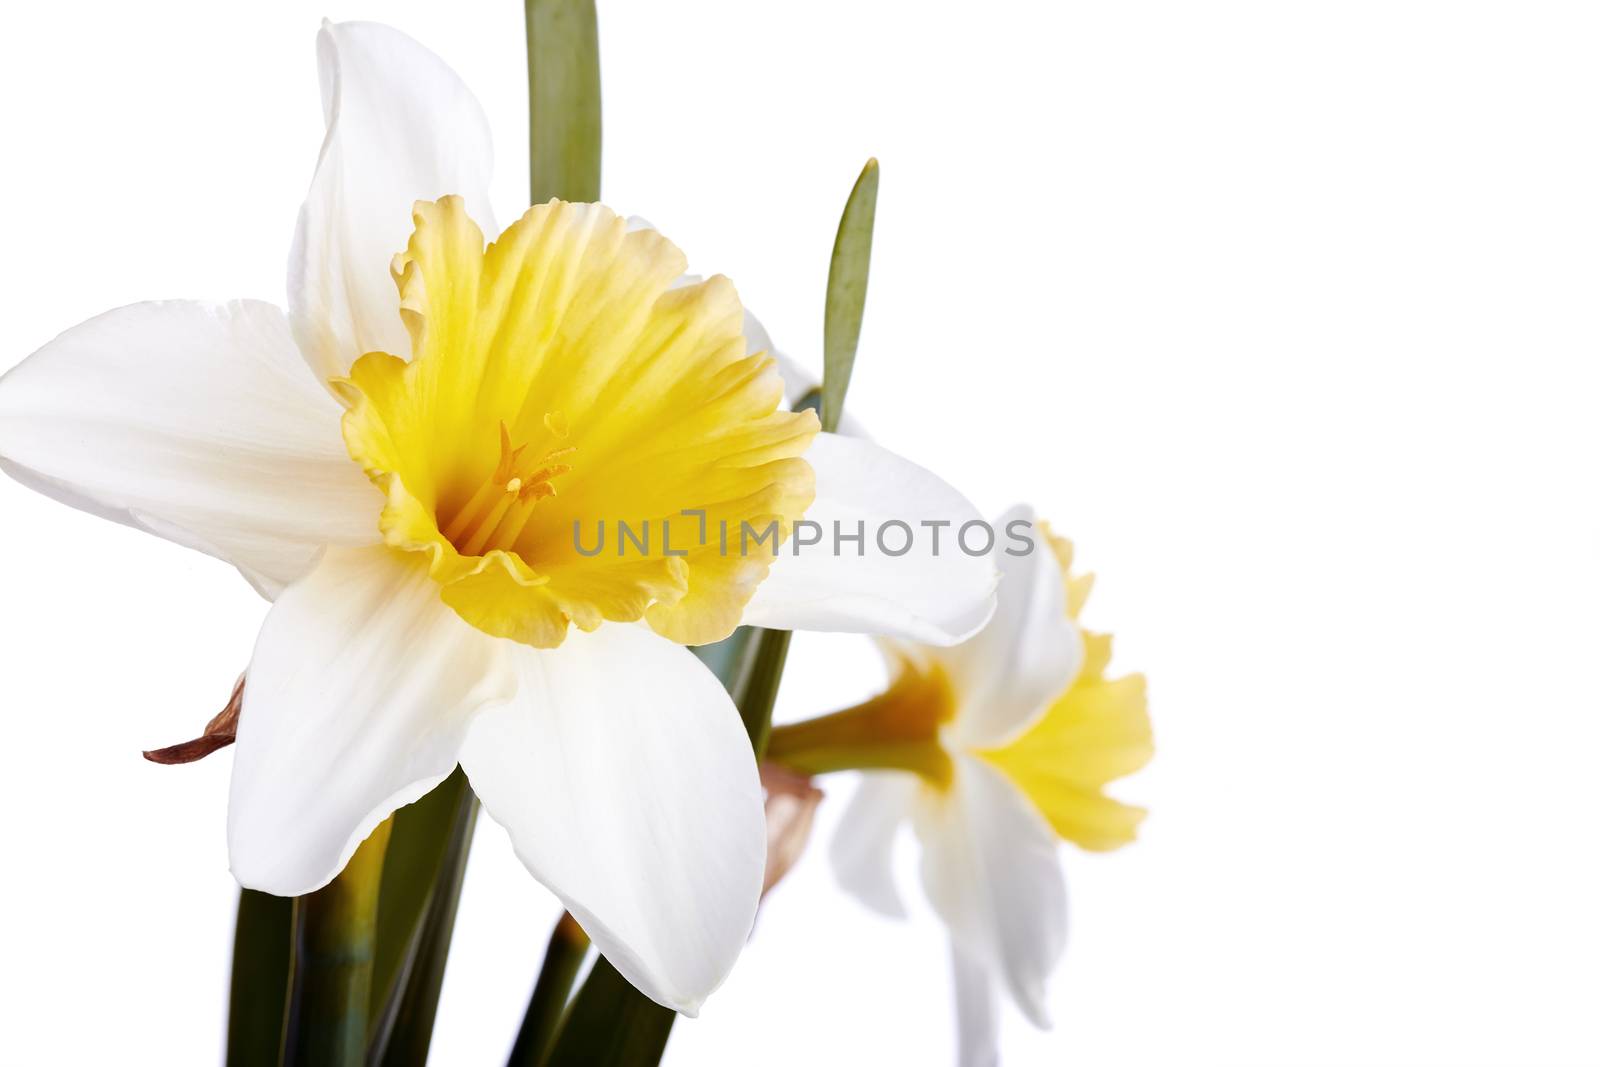 White with yellow a narcissus. Narcissus flower. Flower on a white background. Spring flower.